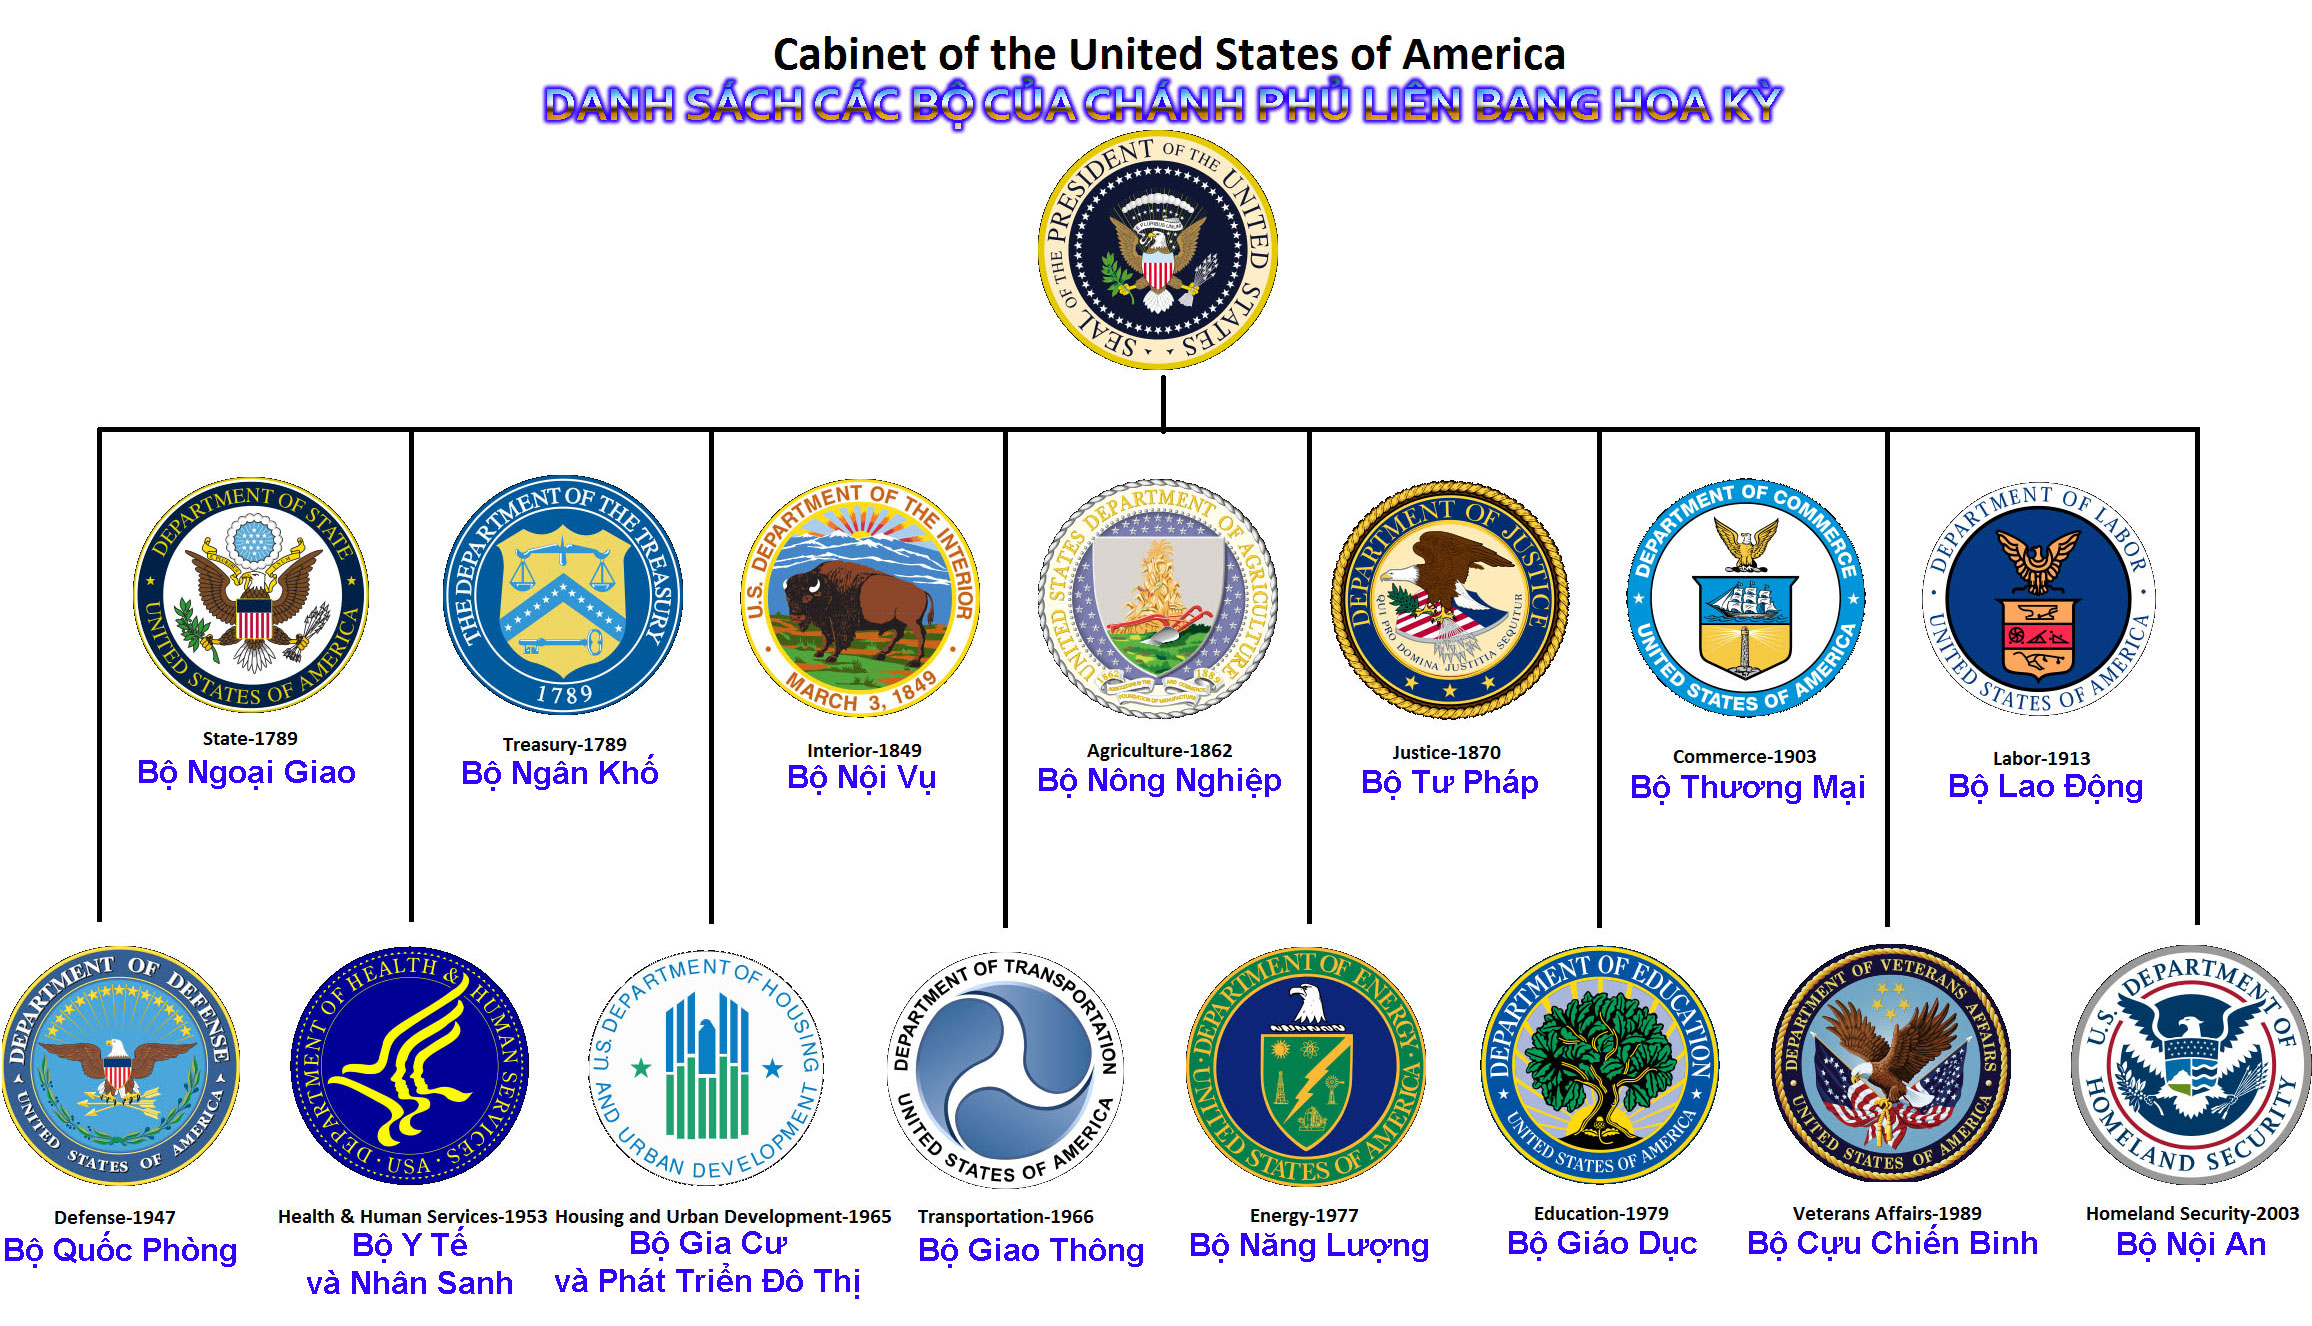 There are 15 departments under the executive branch of the federal government of the United States.